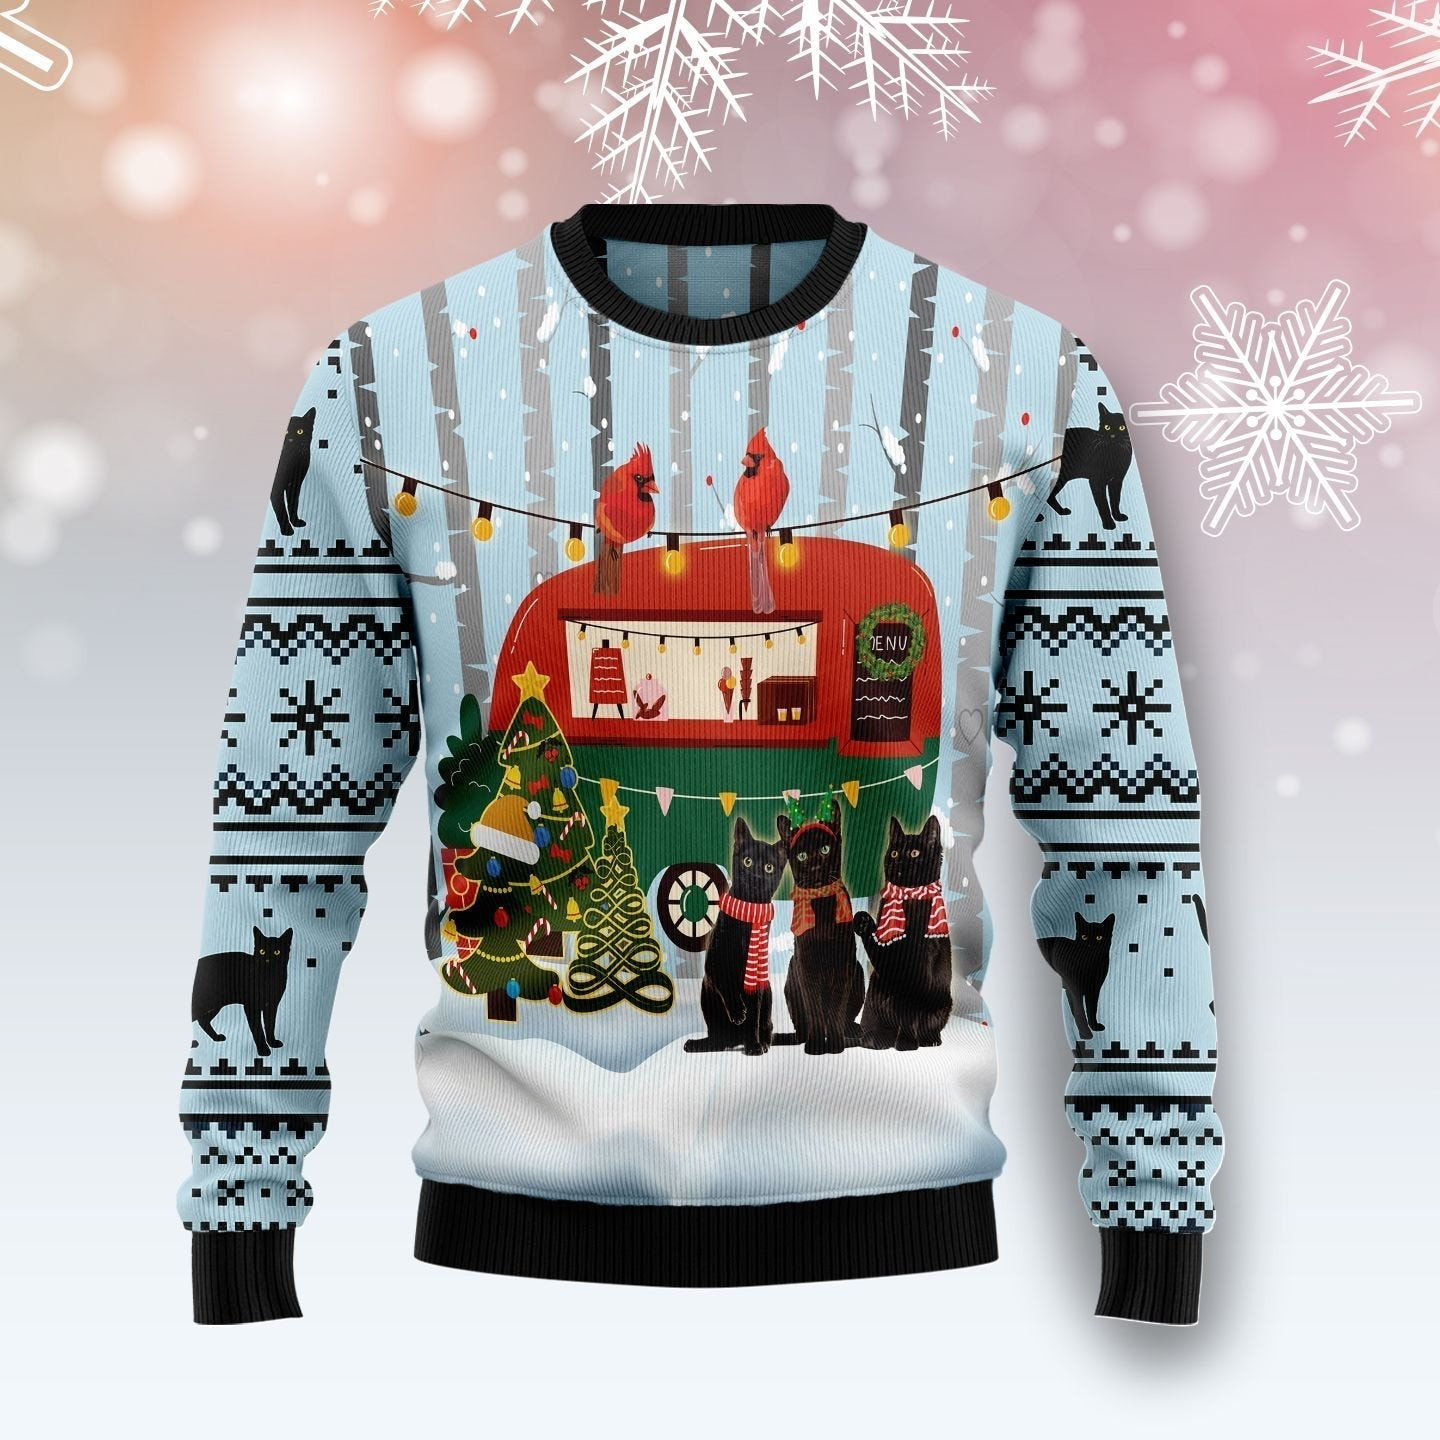 Black Cat Love Camping Ugly Christmas Sweater Ugly Sweater For Men Women, Holiday Sweater